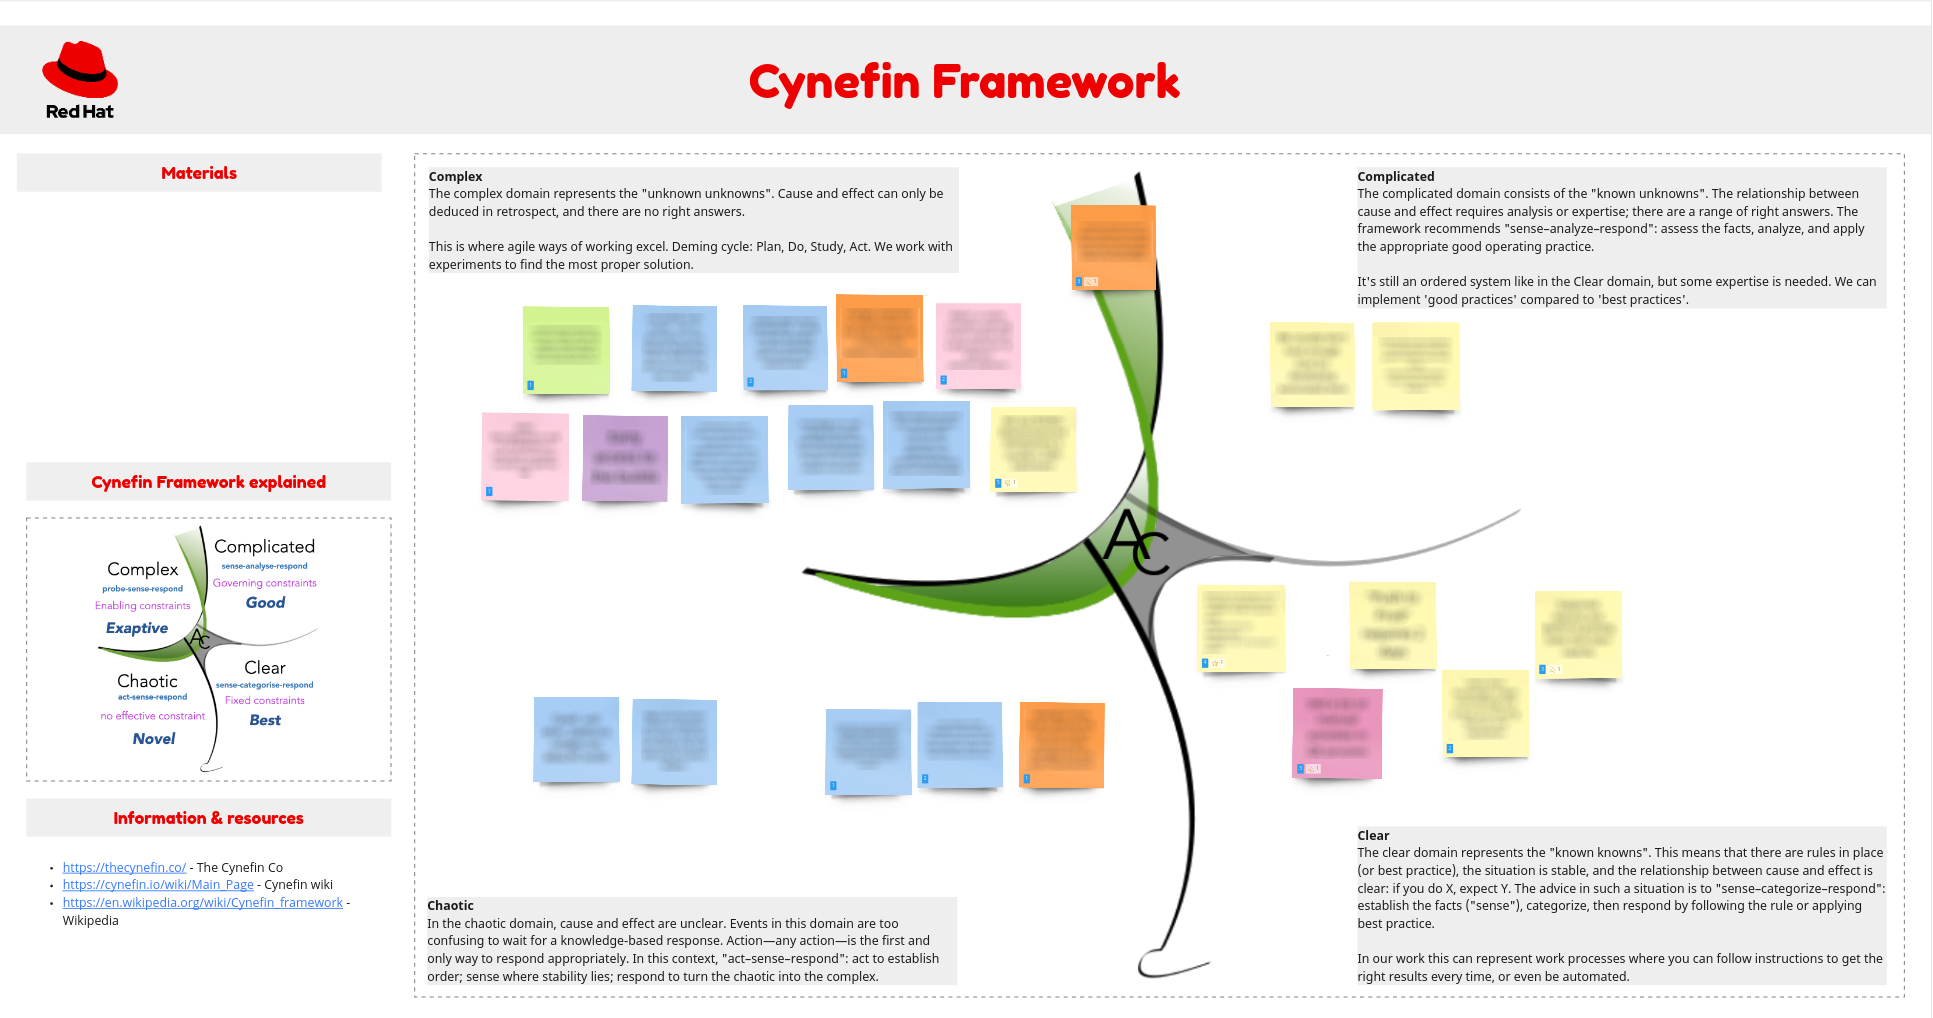 Miro board showing the workshop part 3 with the sticky notes in the Cynefin Framework&quot;